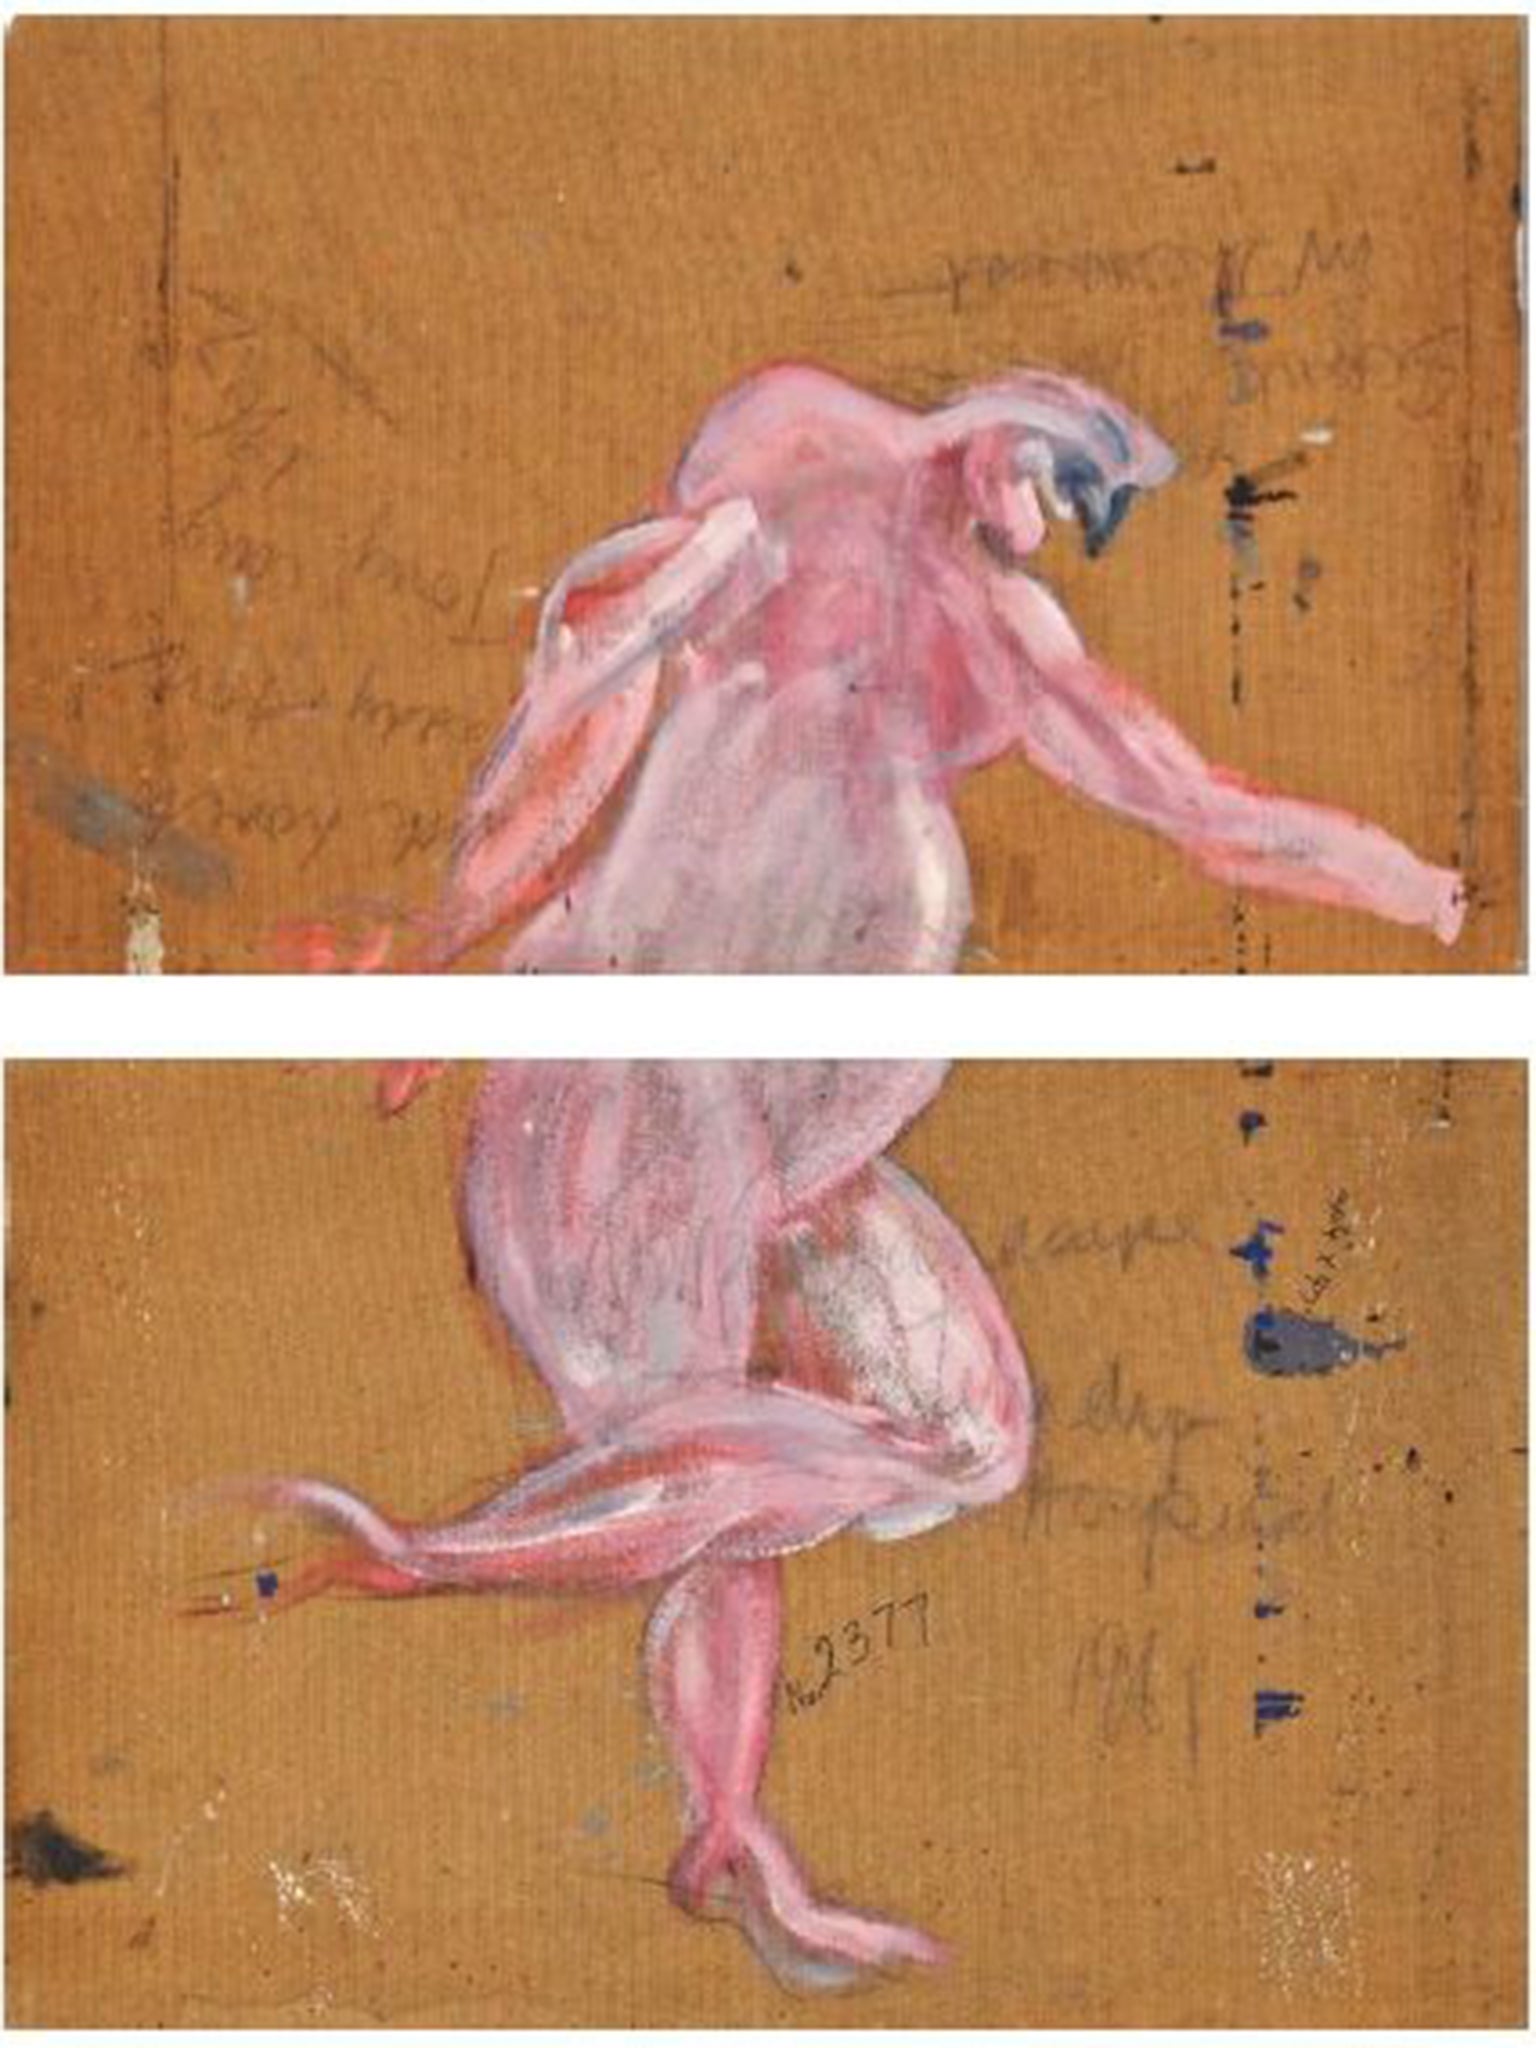 The Francis Bacon work, split in two, and recently “discovered”